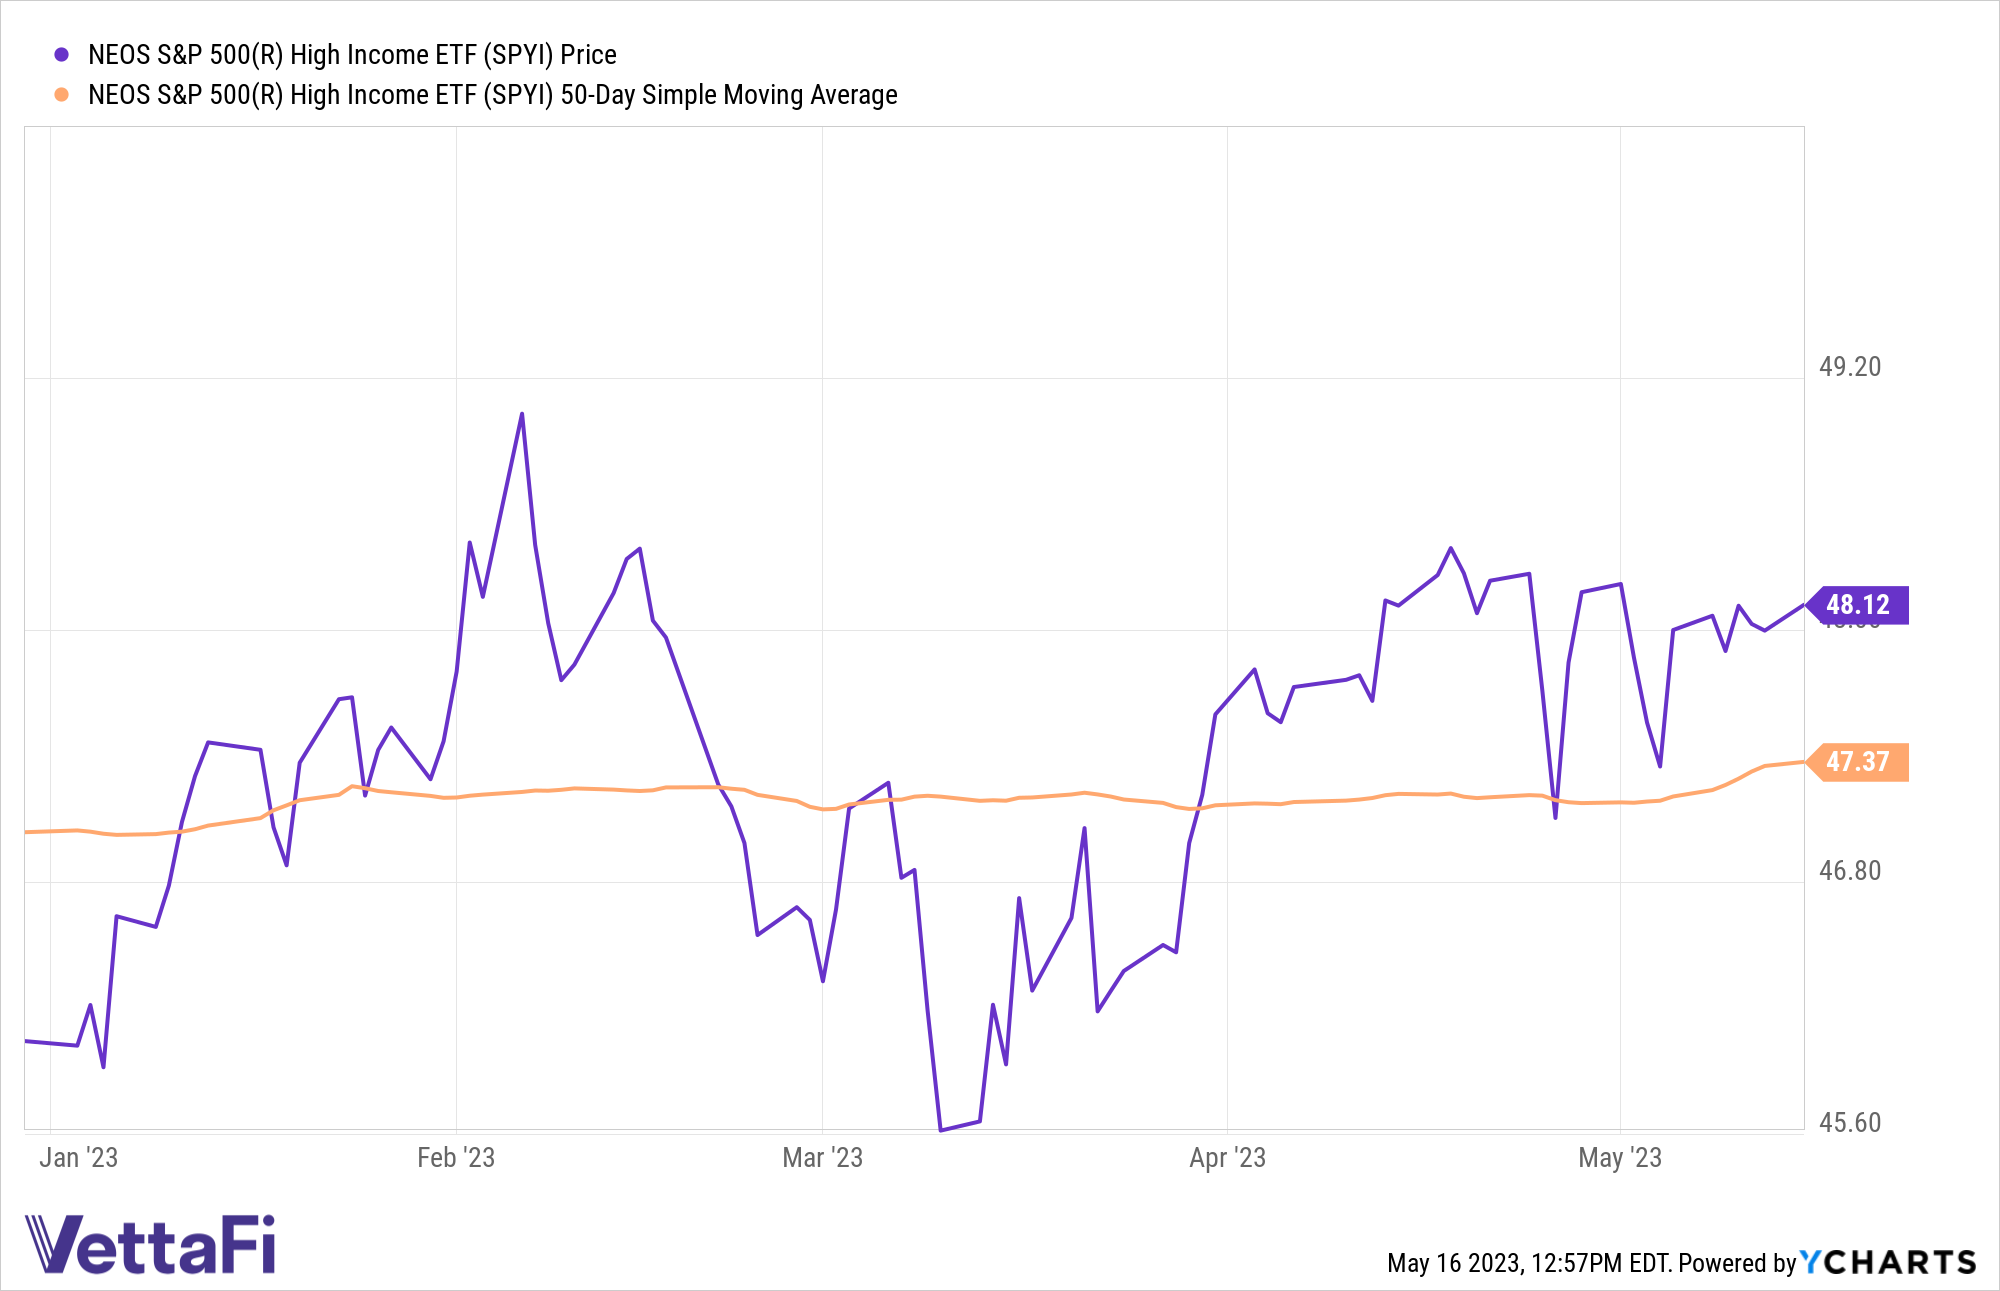 Chart of SPYI's performance YTD as U.S. default risk looms, and the fund's 50-day SMA of 47.37 compared to SPYI at 48.12.